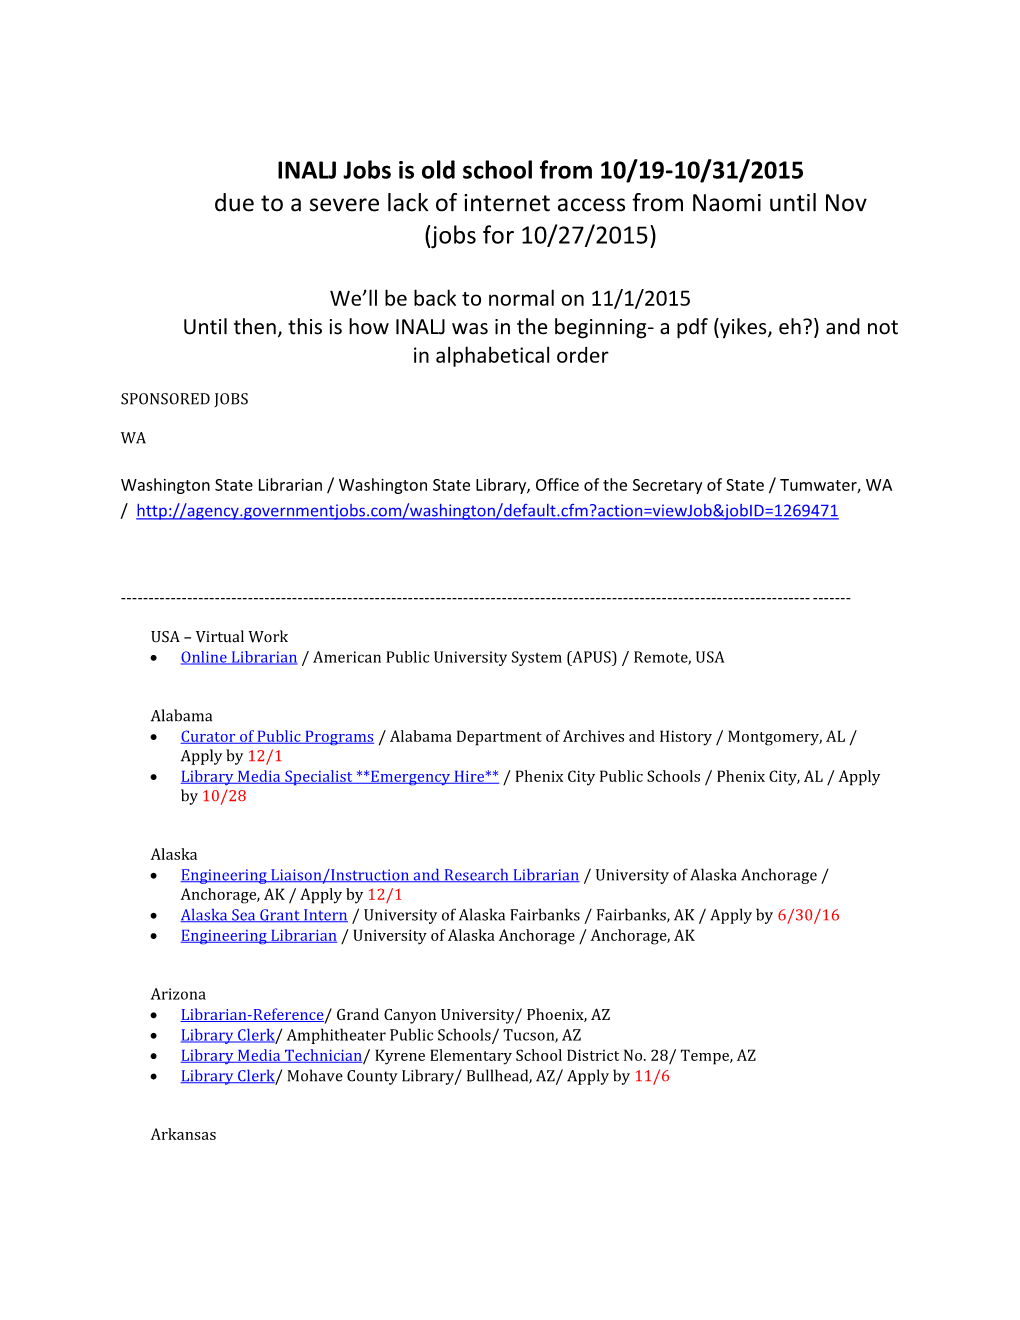 Jobs for 10/27/2015)